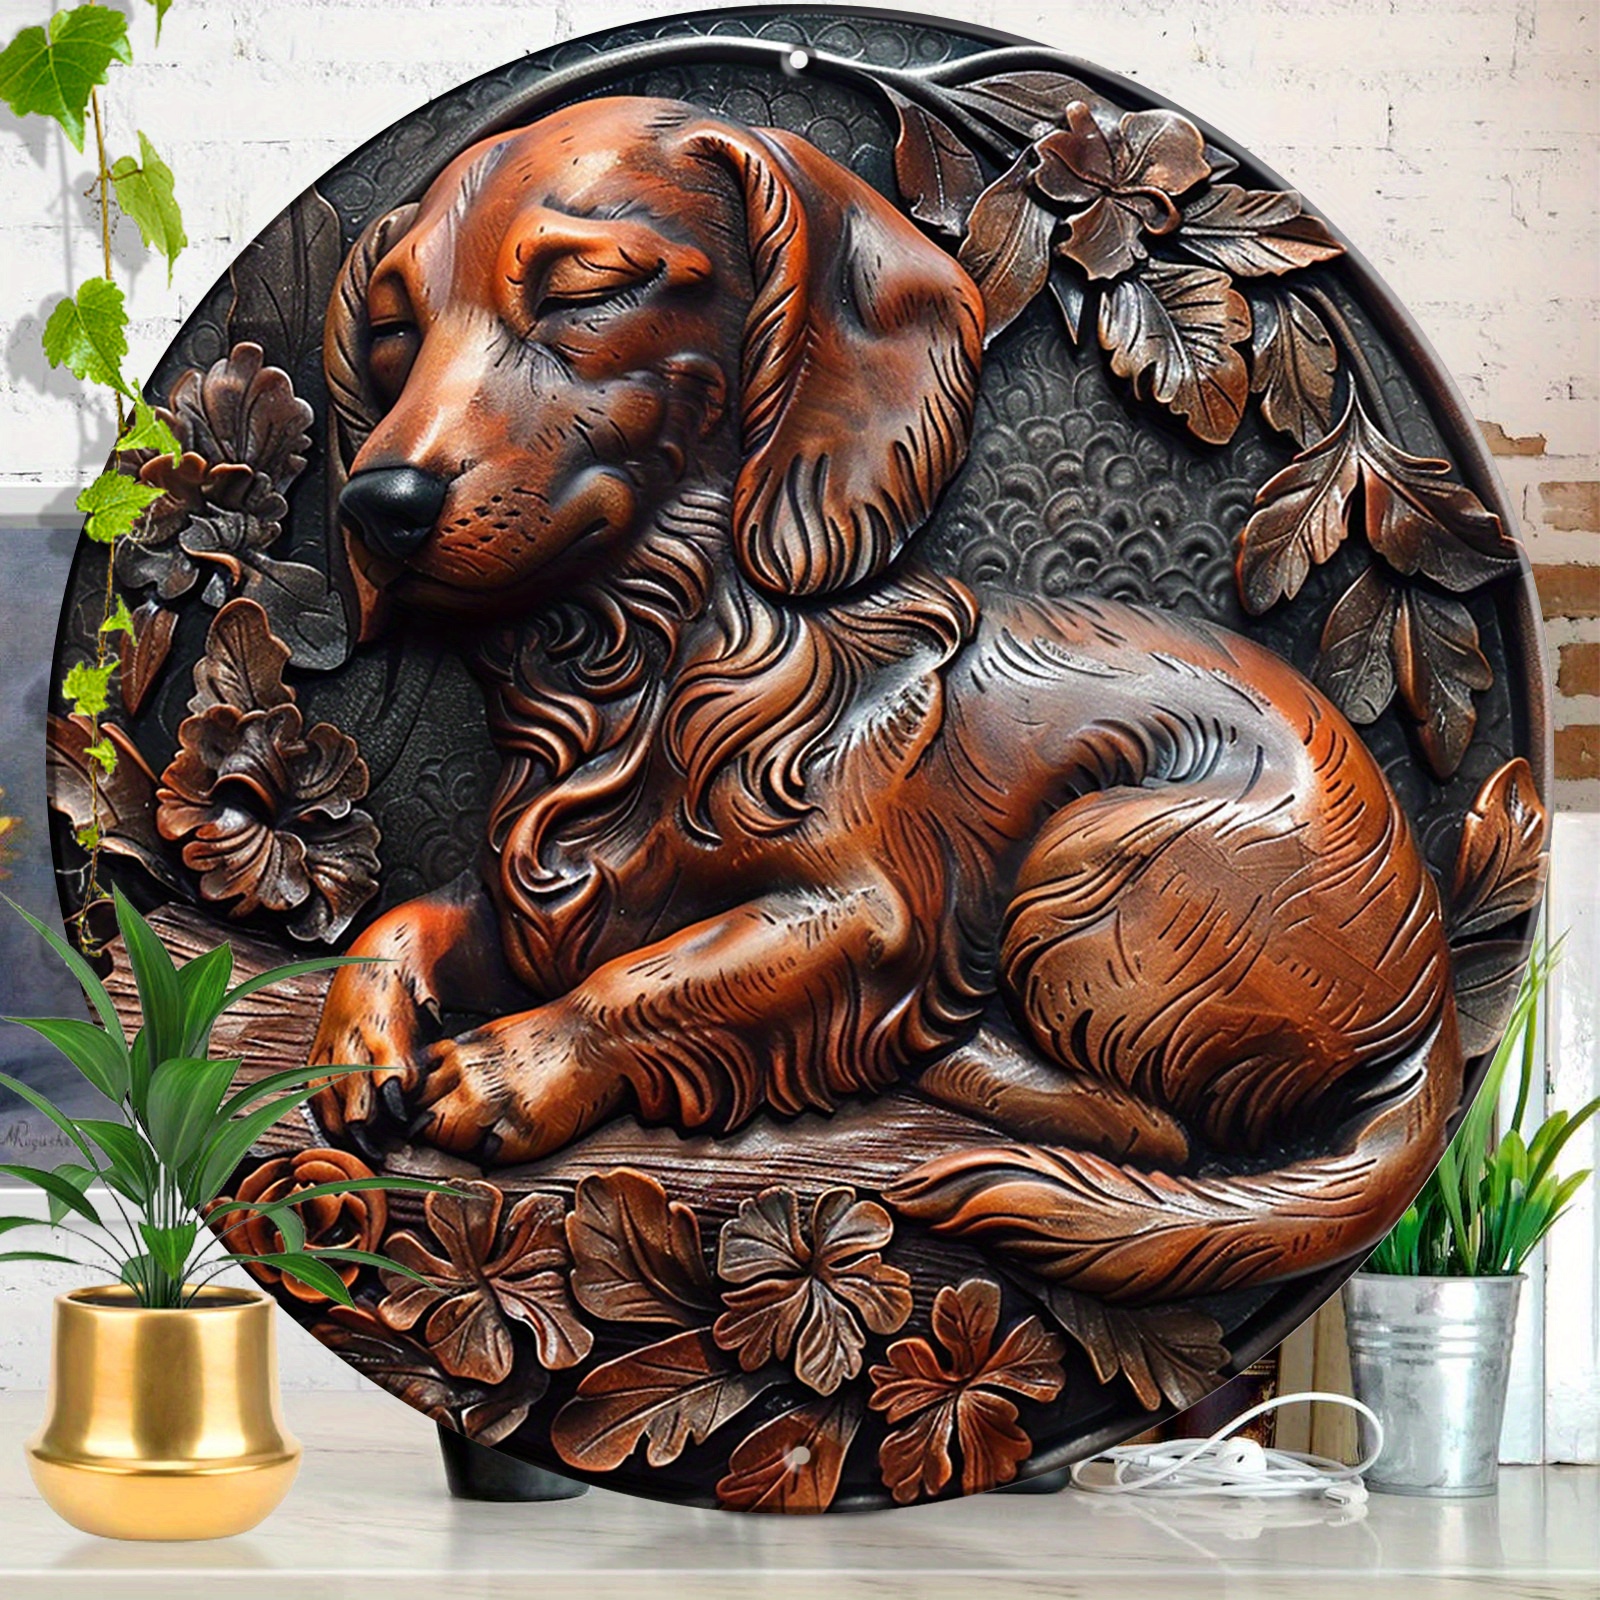 

Dachshund Wood Carving Sign: 2d Flat Aluminum Door Welcome Art For Home, Living Room, Garden, Wall Decoration